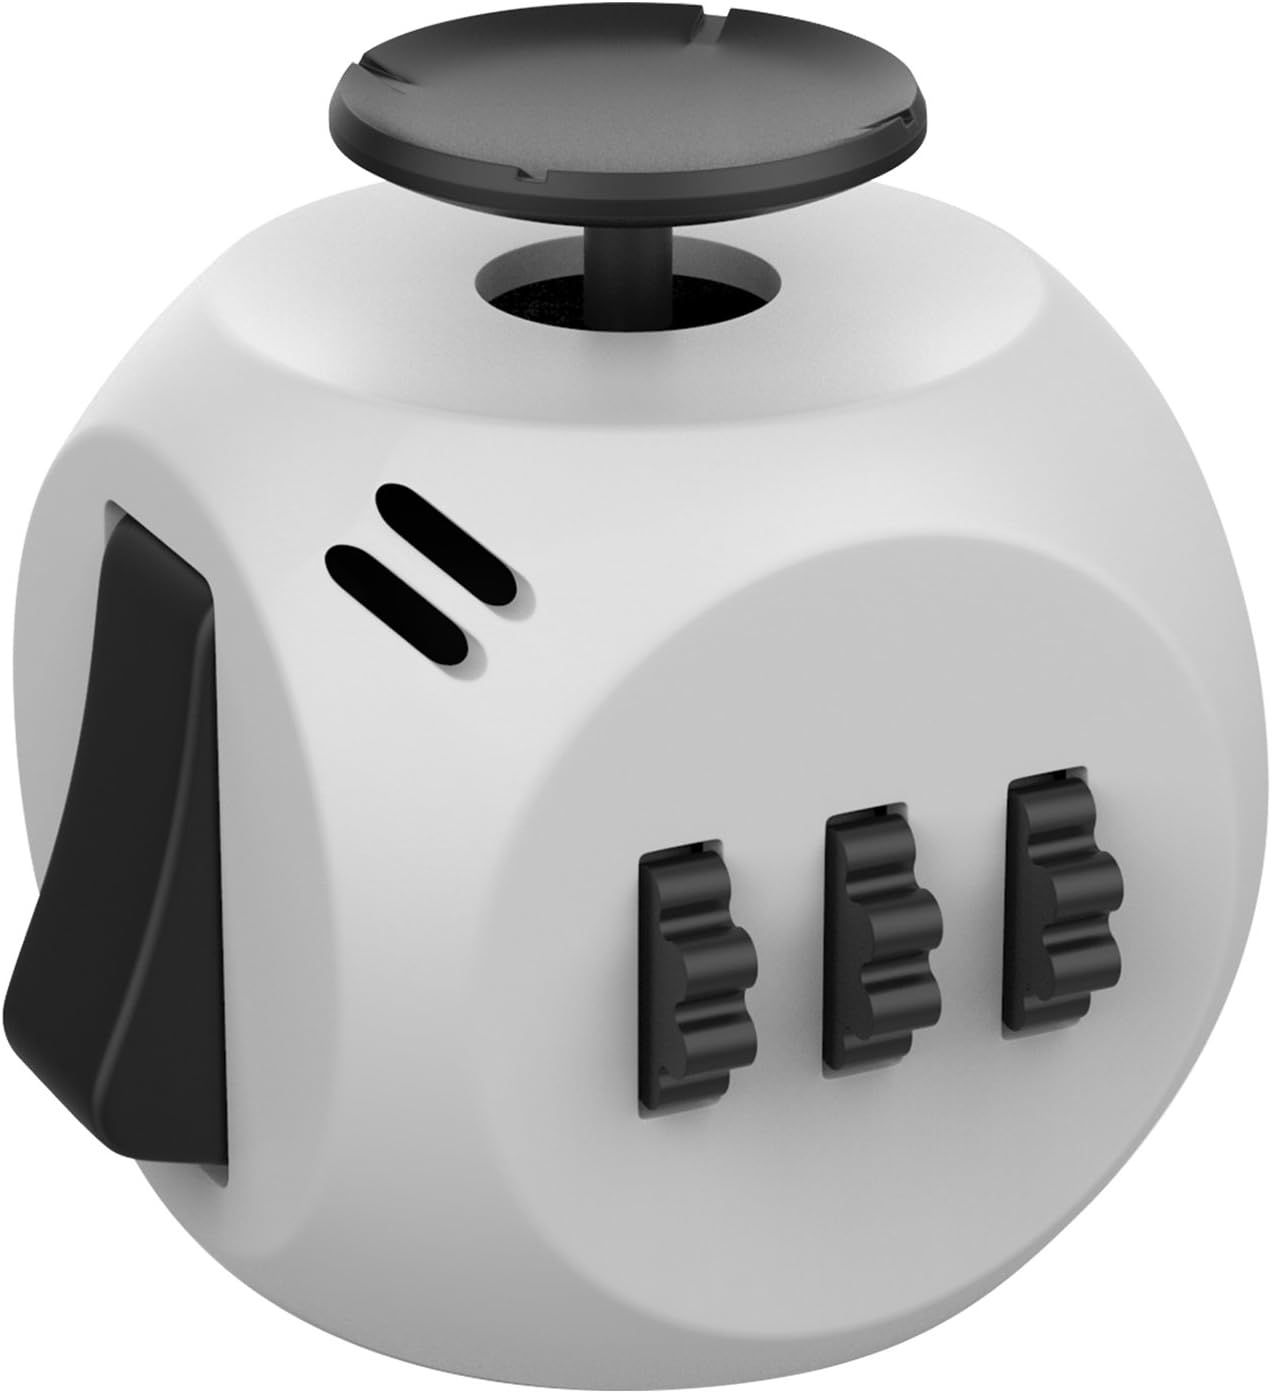 Helect H1037 Fidget Cube Toy Relieves Stress and Anxiety | Amazon (US)